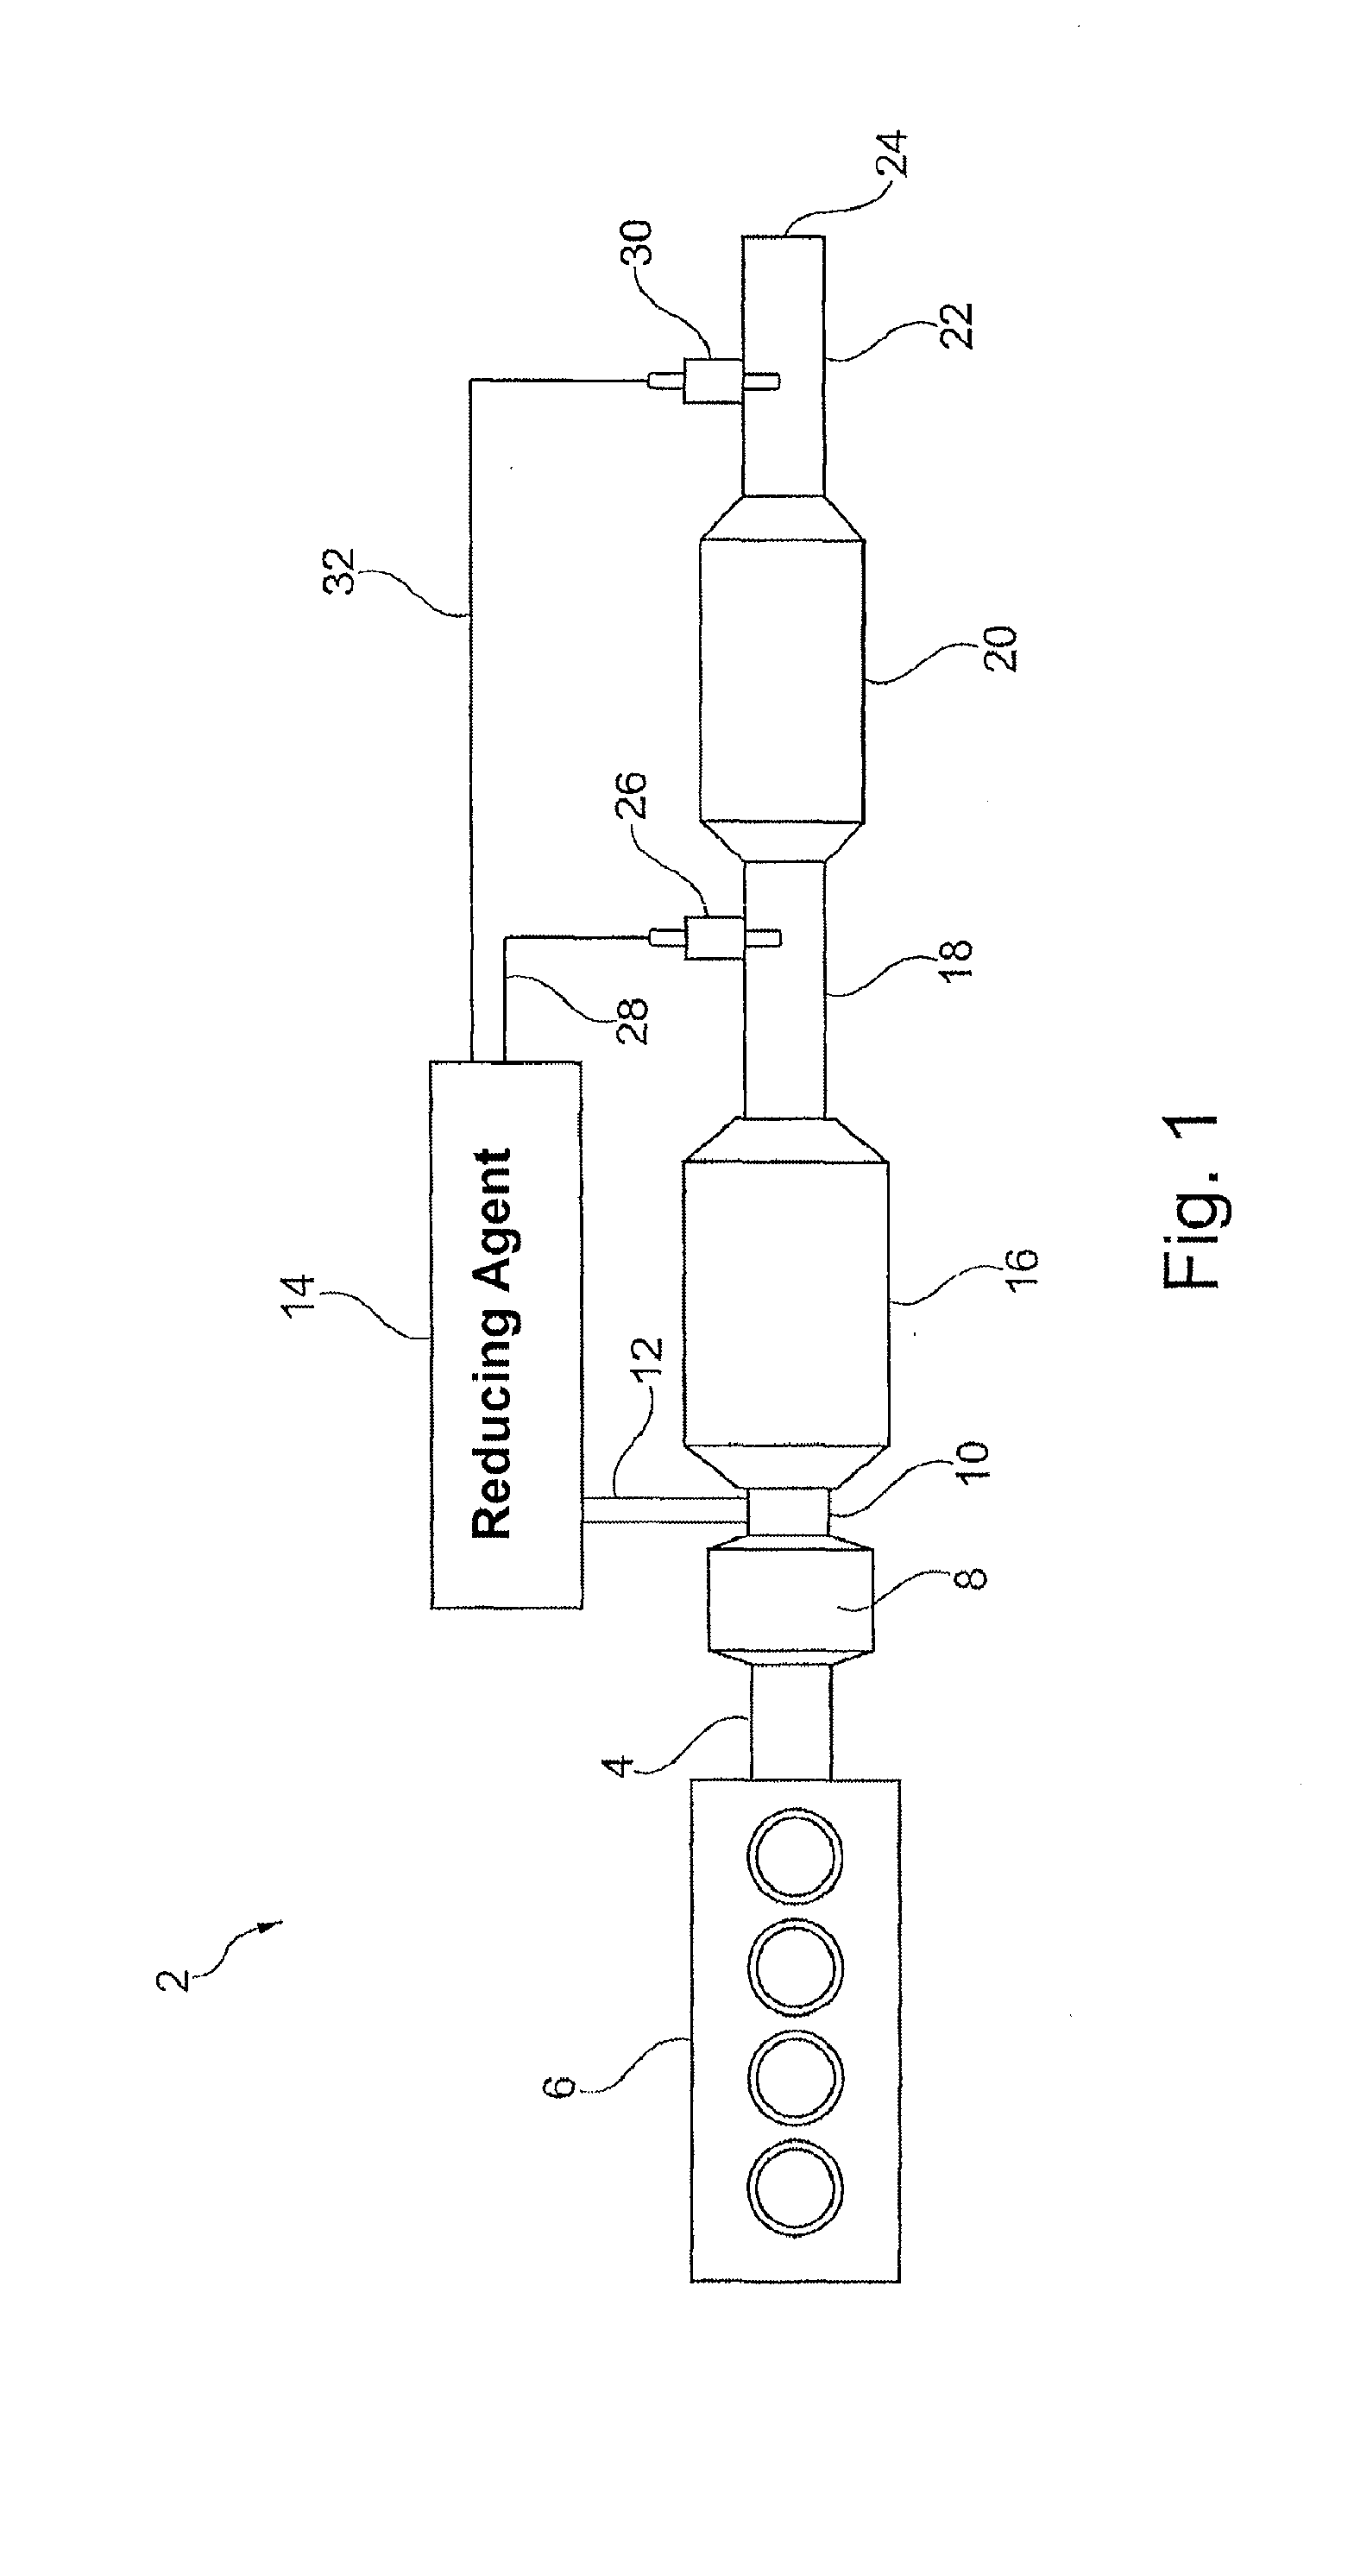 Sensor for Detecting the Amount of a Reducing Agent and the Amount of a Pollutant in an Exhaust Gas